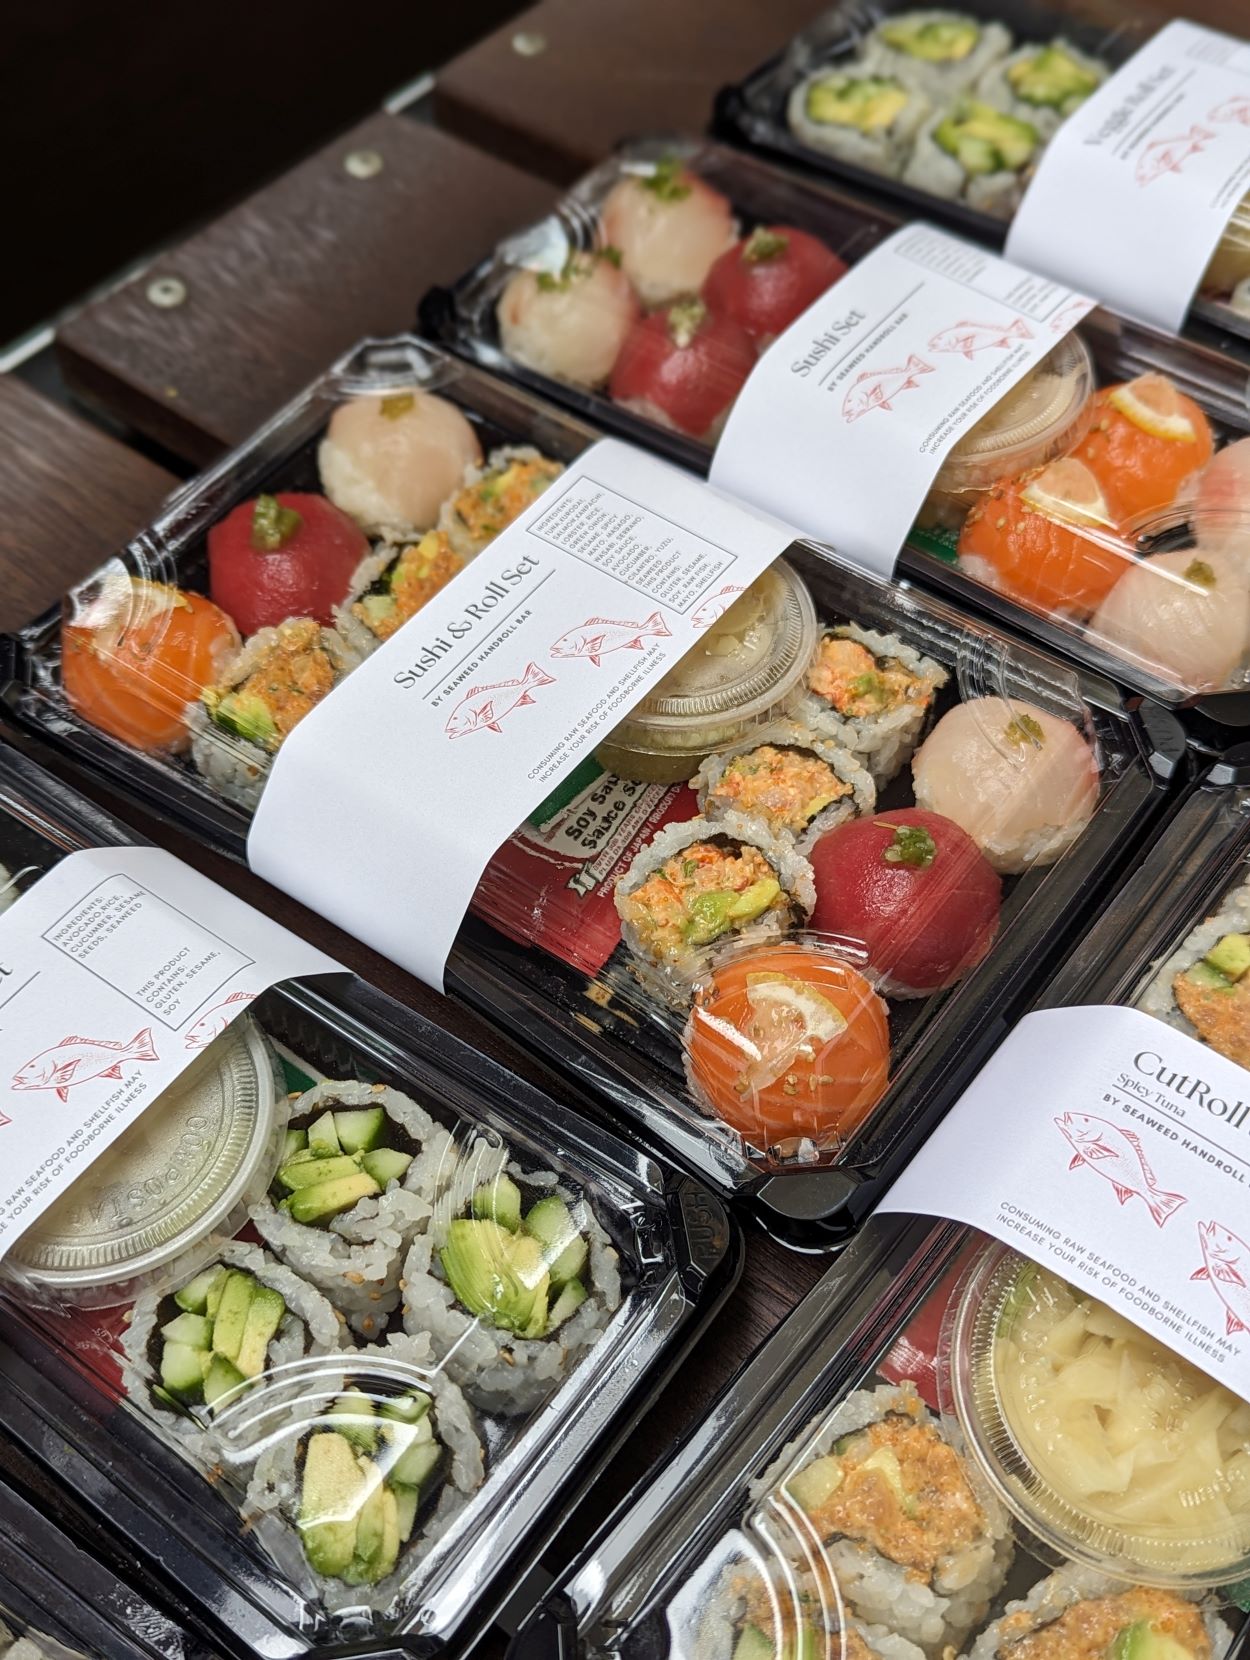 An image of the  premium “grab-and-go” sushi at the Hollywood Bowl.